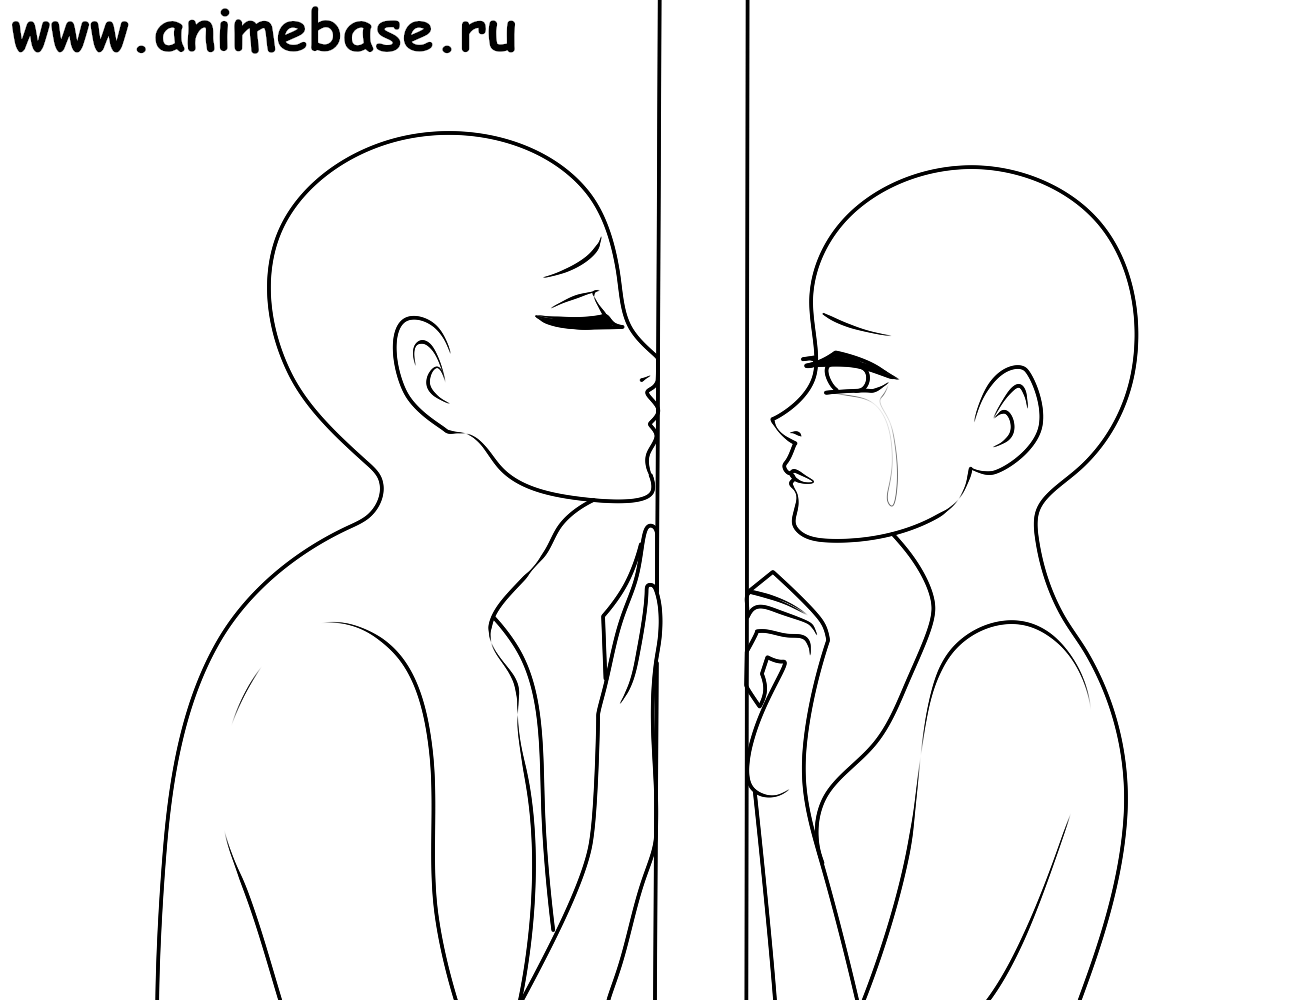 Vampedia - Anime Couple Pose Most common poses you see... | Facebook